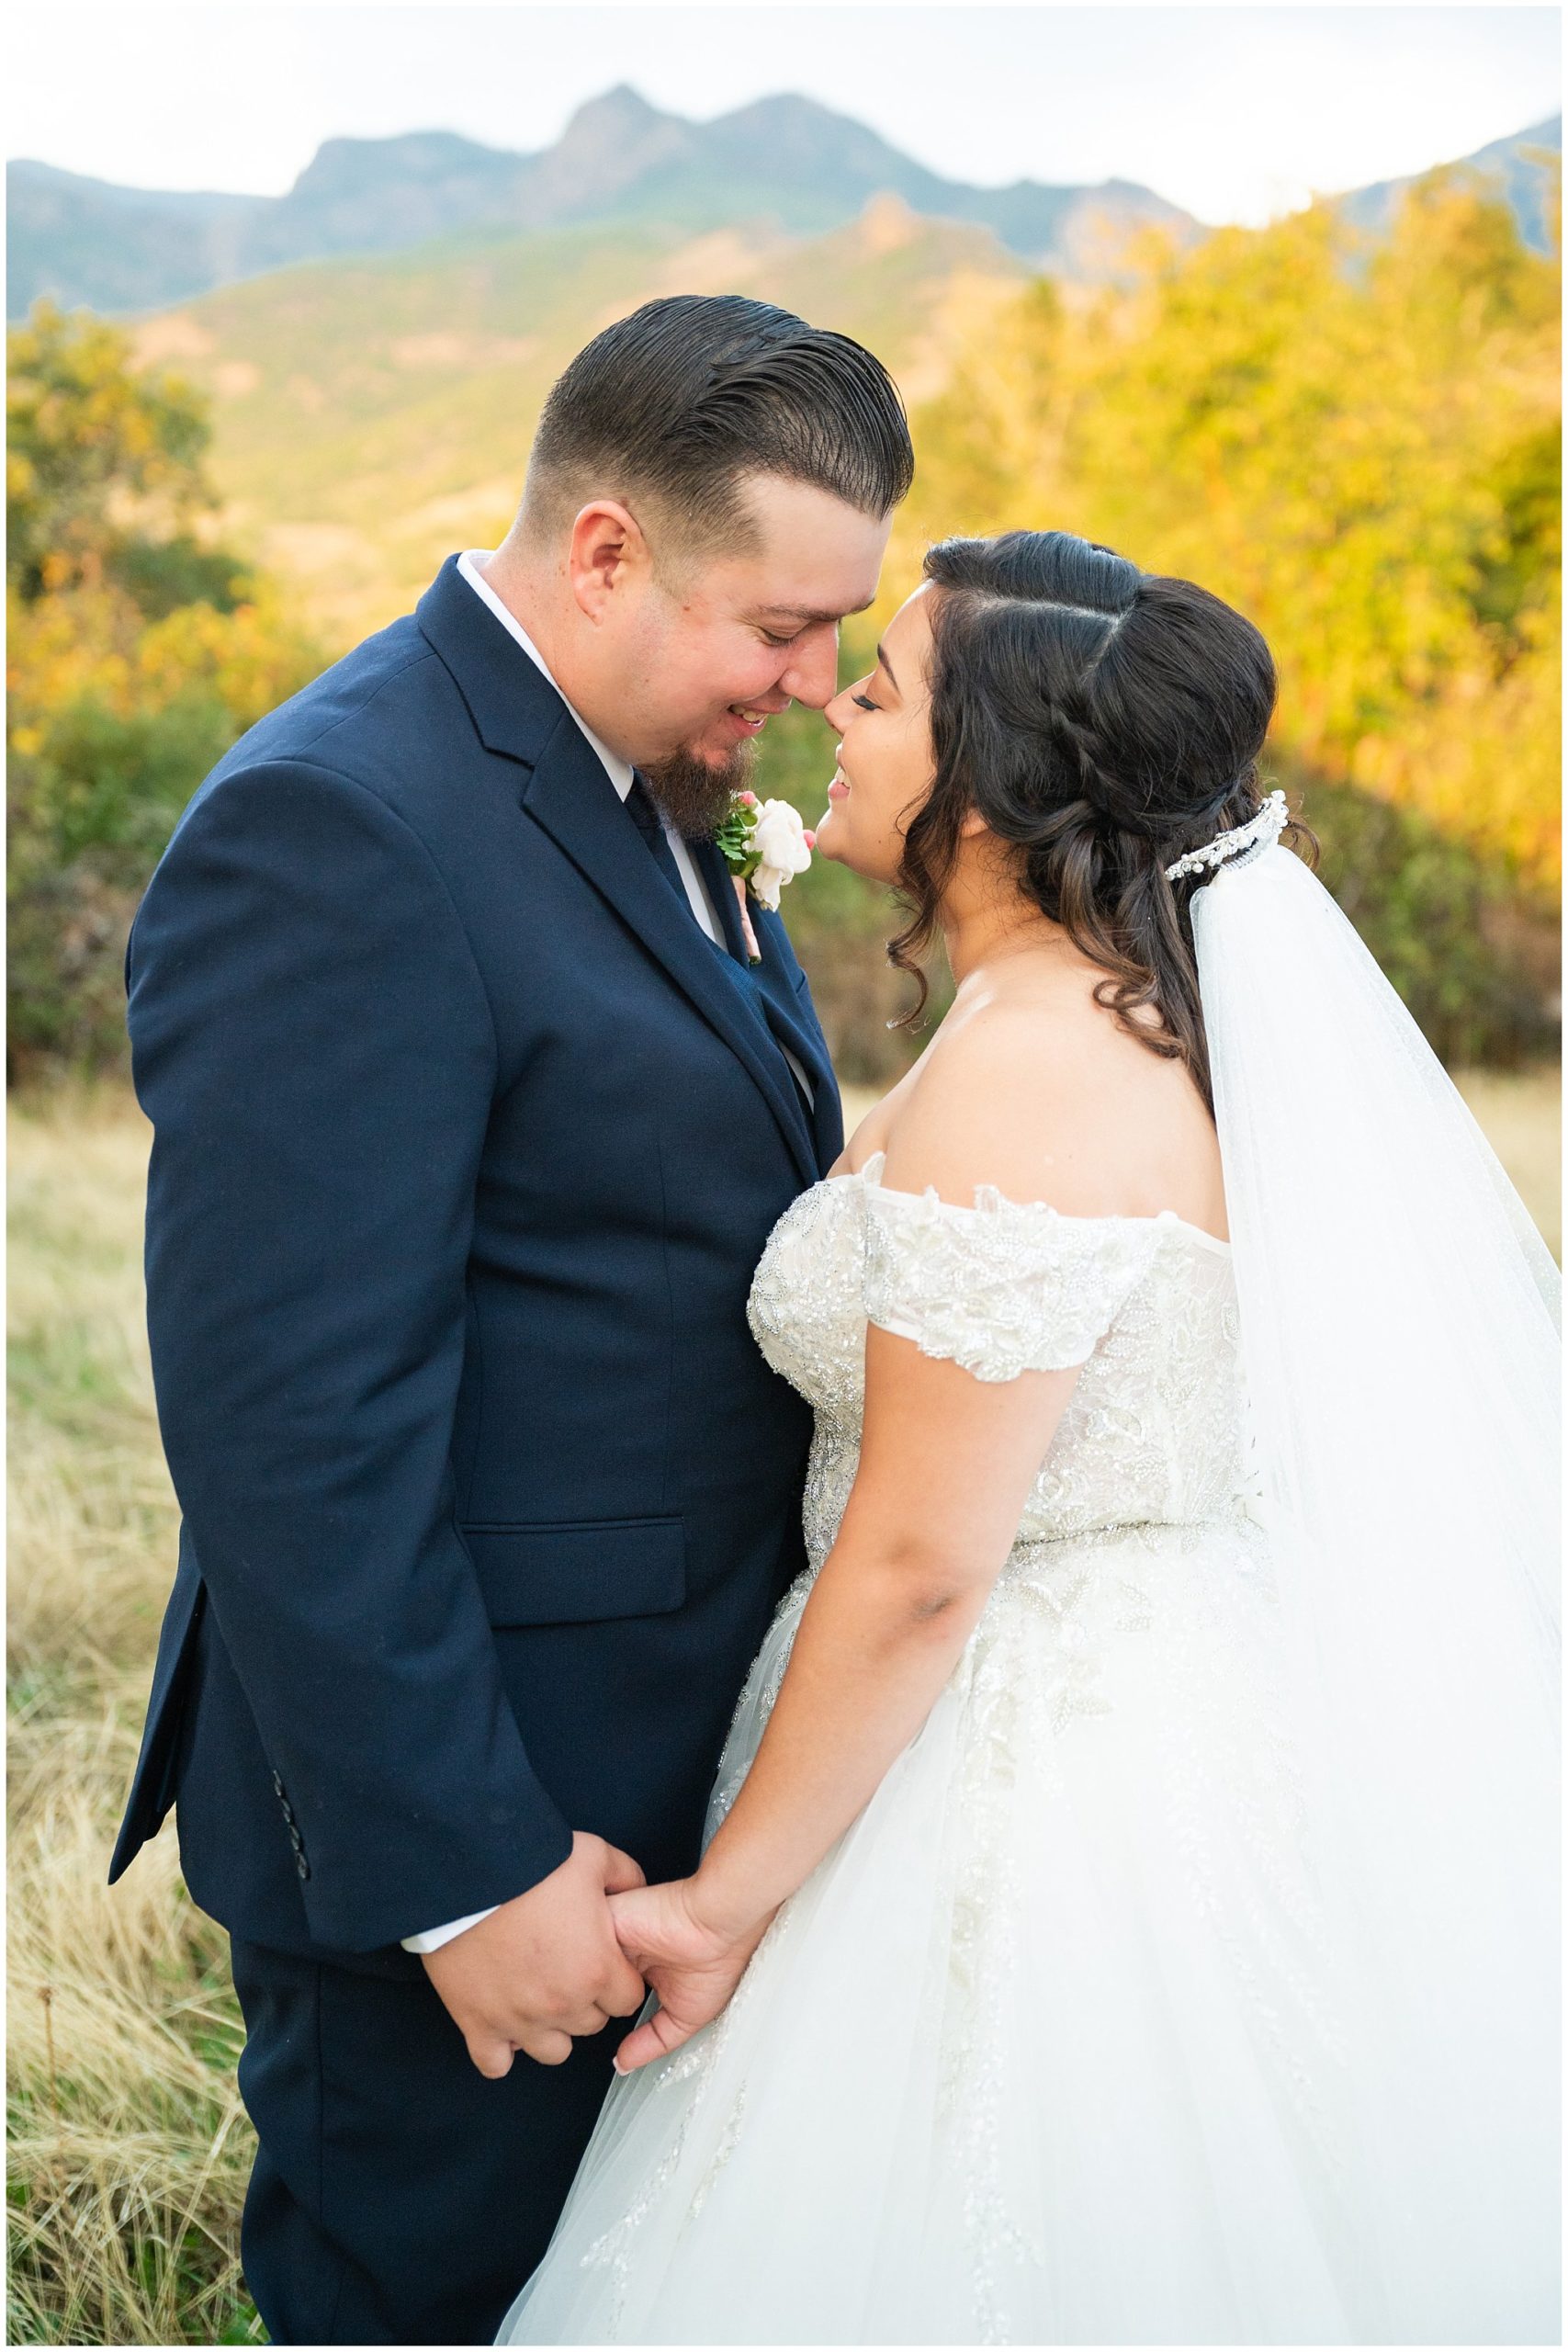 Bride and groom portraits in front of the Utah mountains with bride wearing long princess dress and long veil | Rustic Mountain Destination Wedding at Oak Hills Utah | Jessie and Dallin Photography